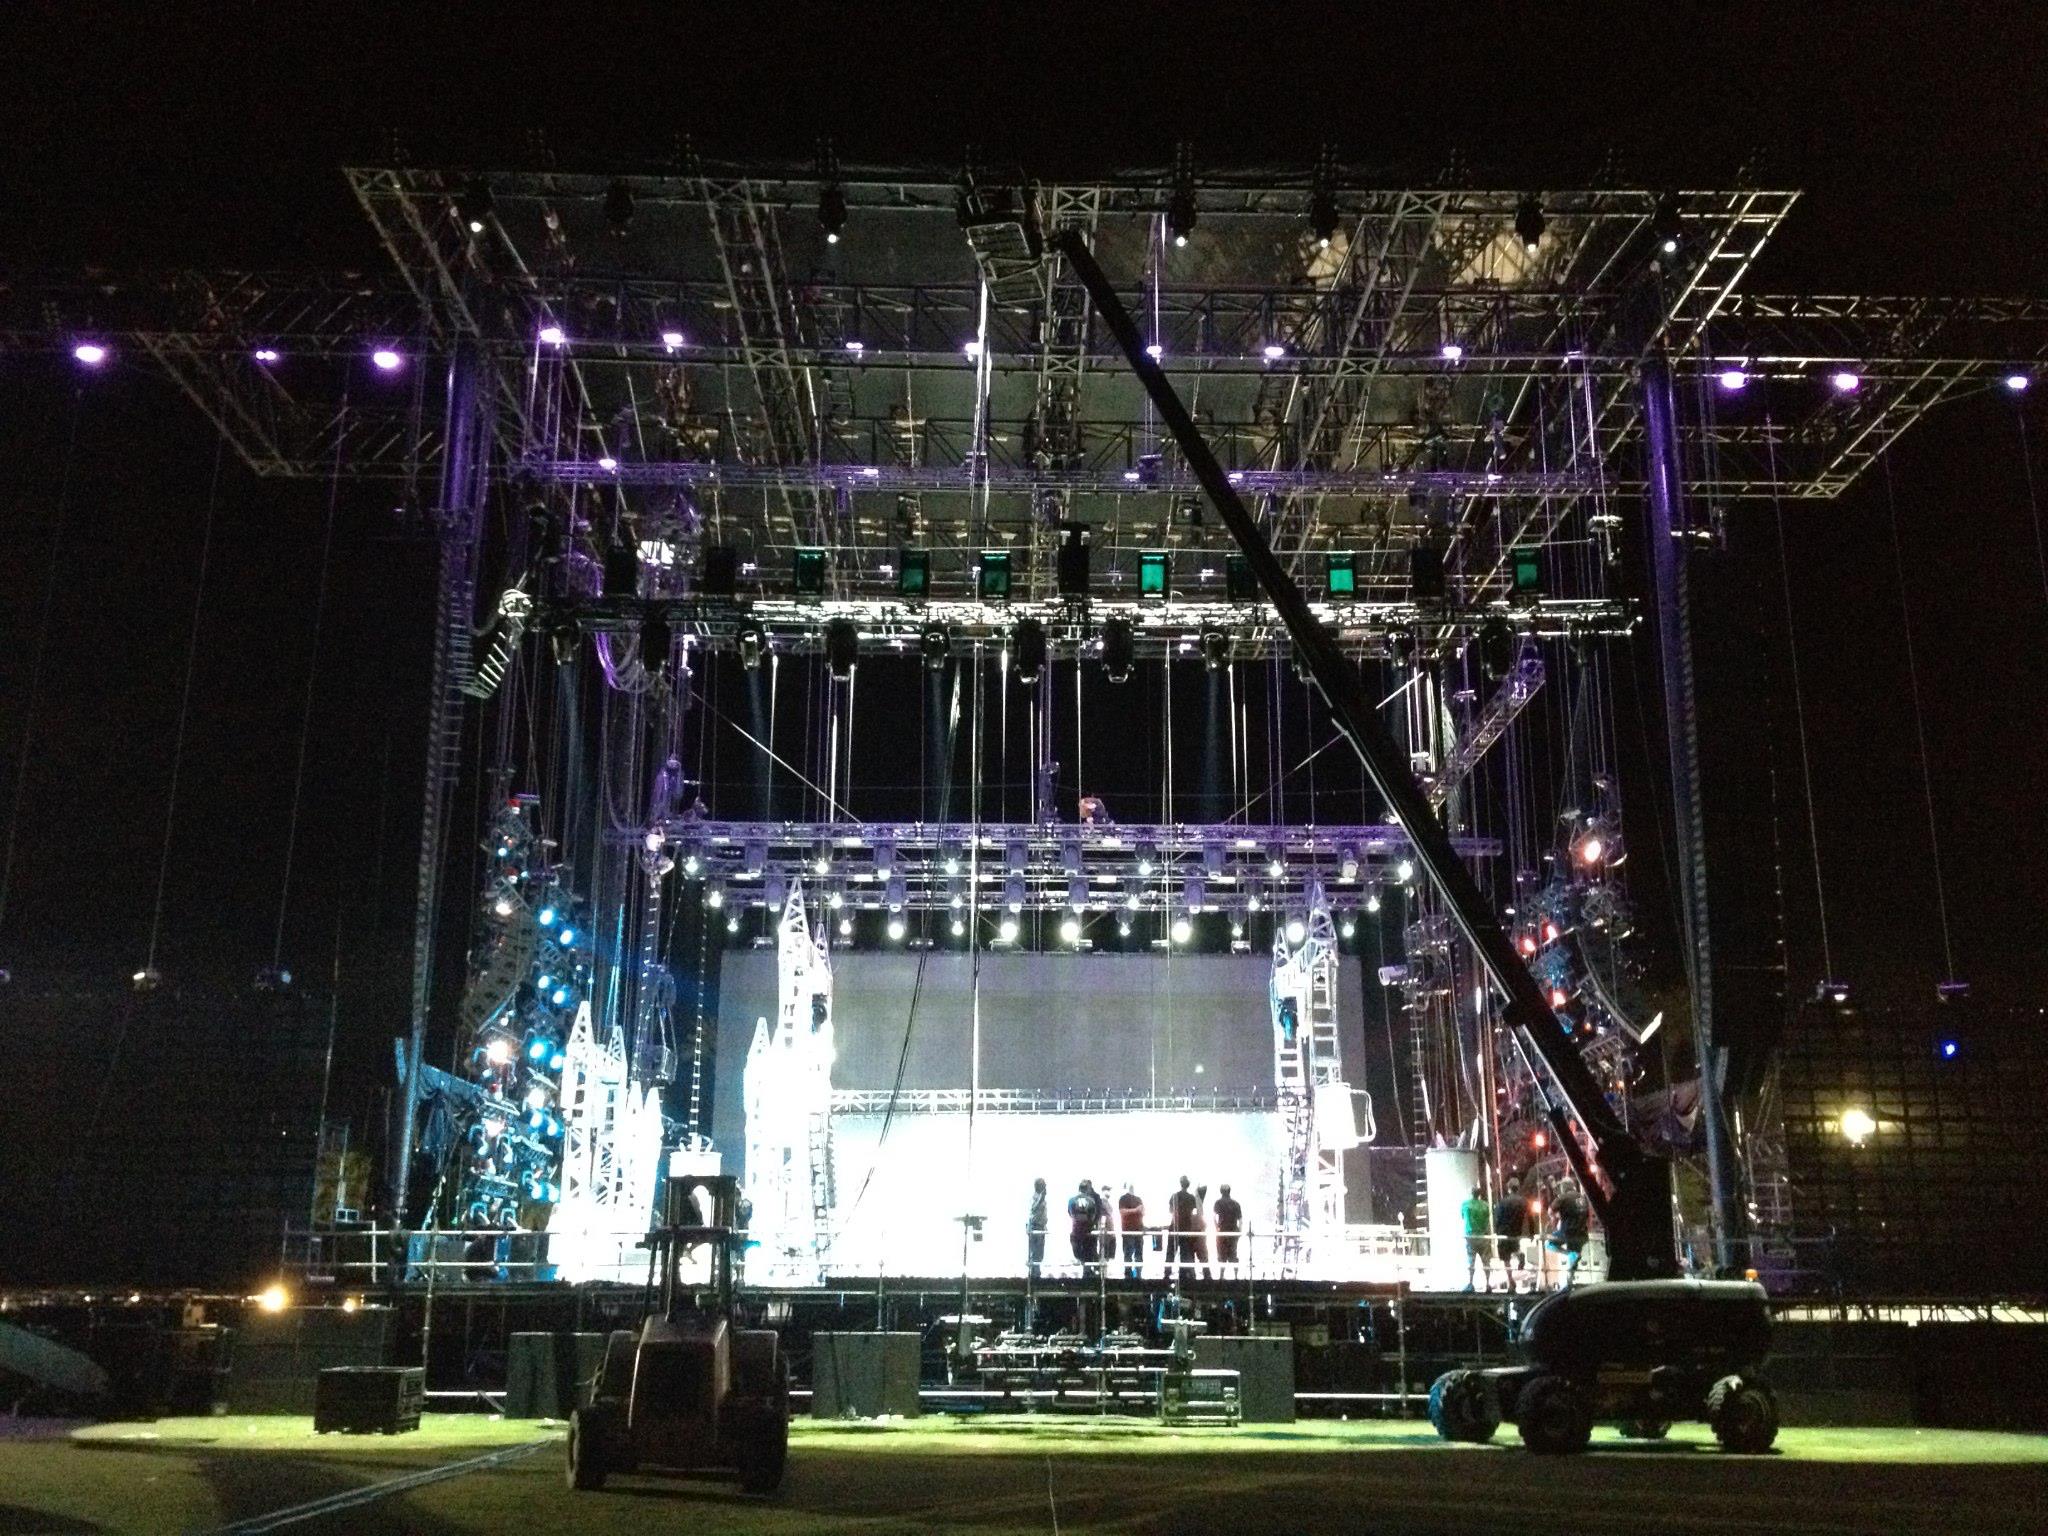 Dr. Dre & Snoop Dog's stage at Coachella 2012 with Virtual Tupac